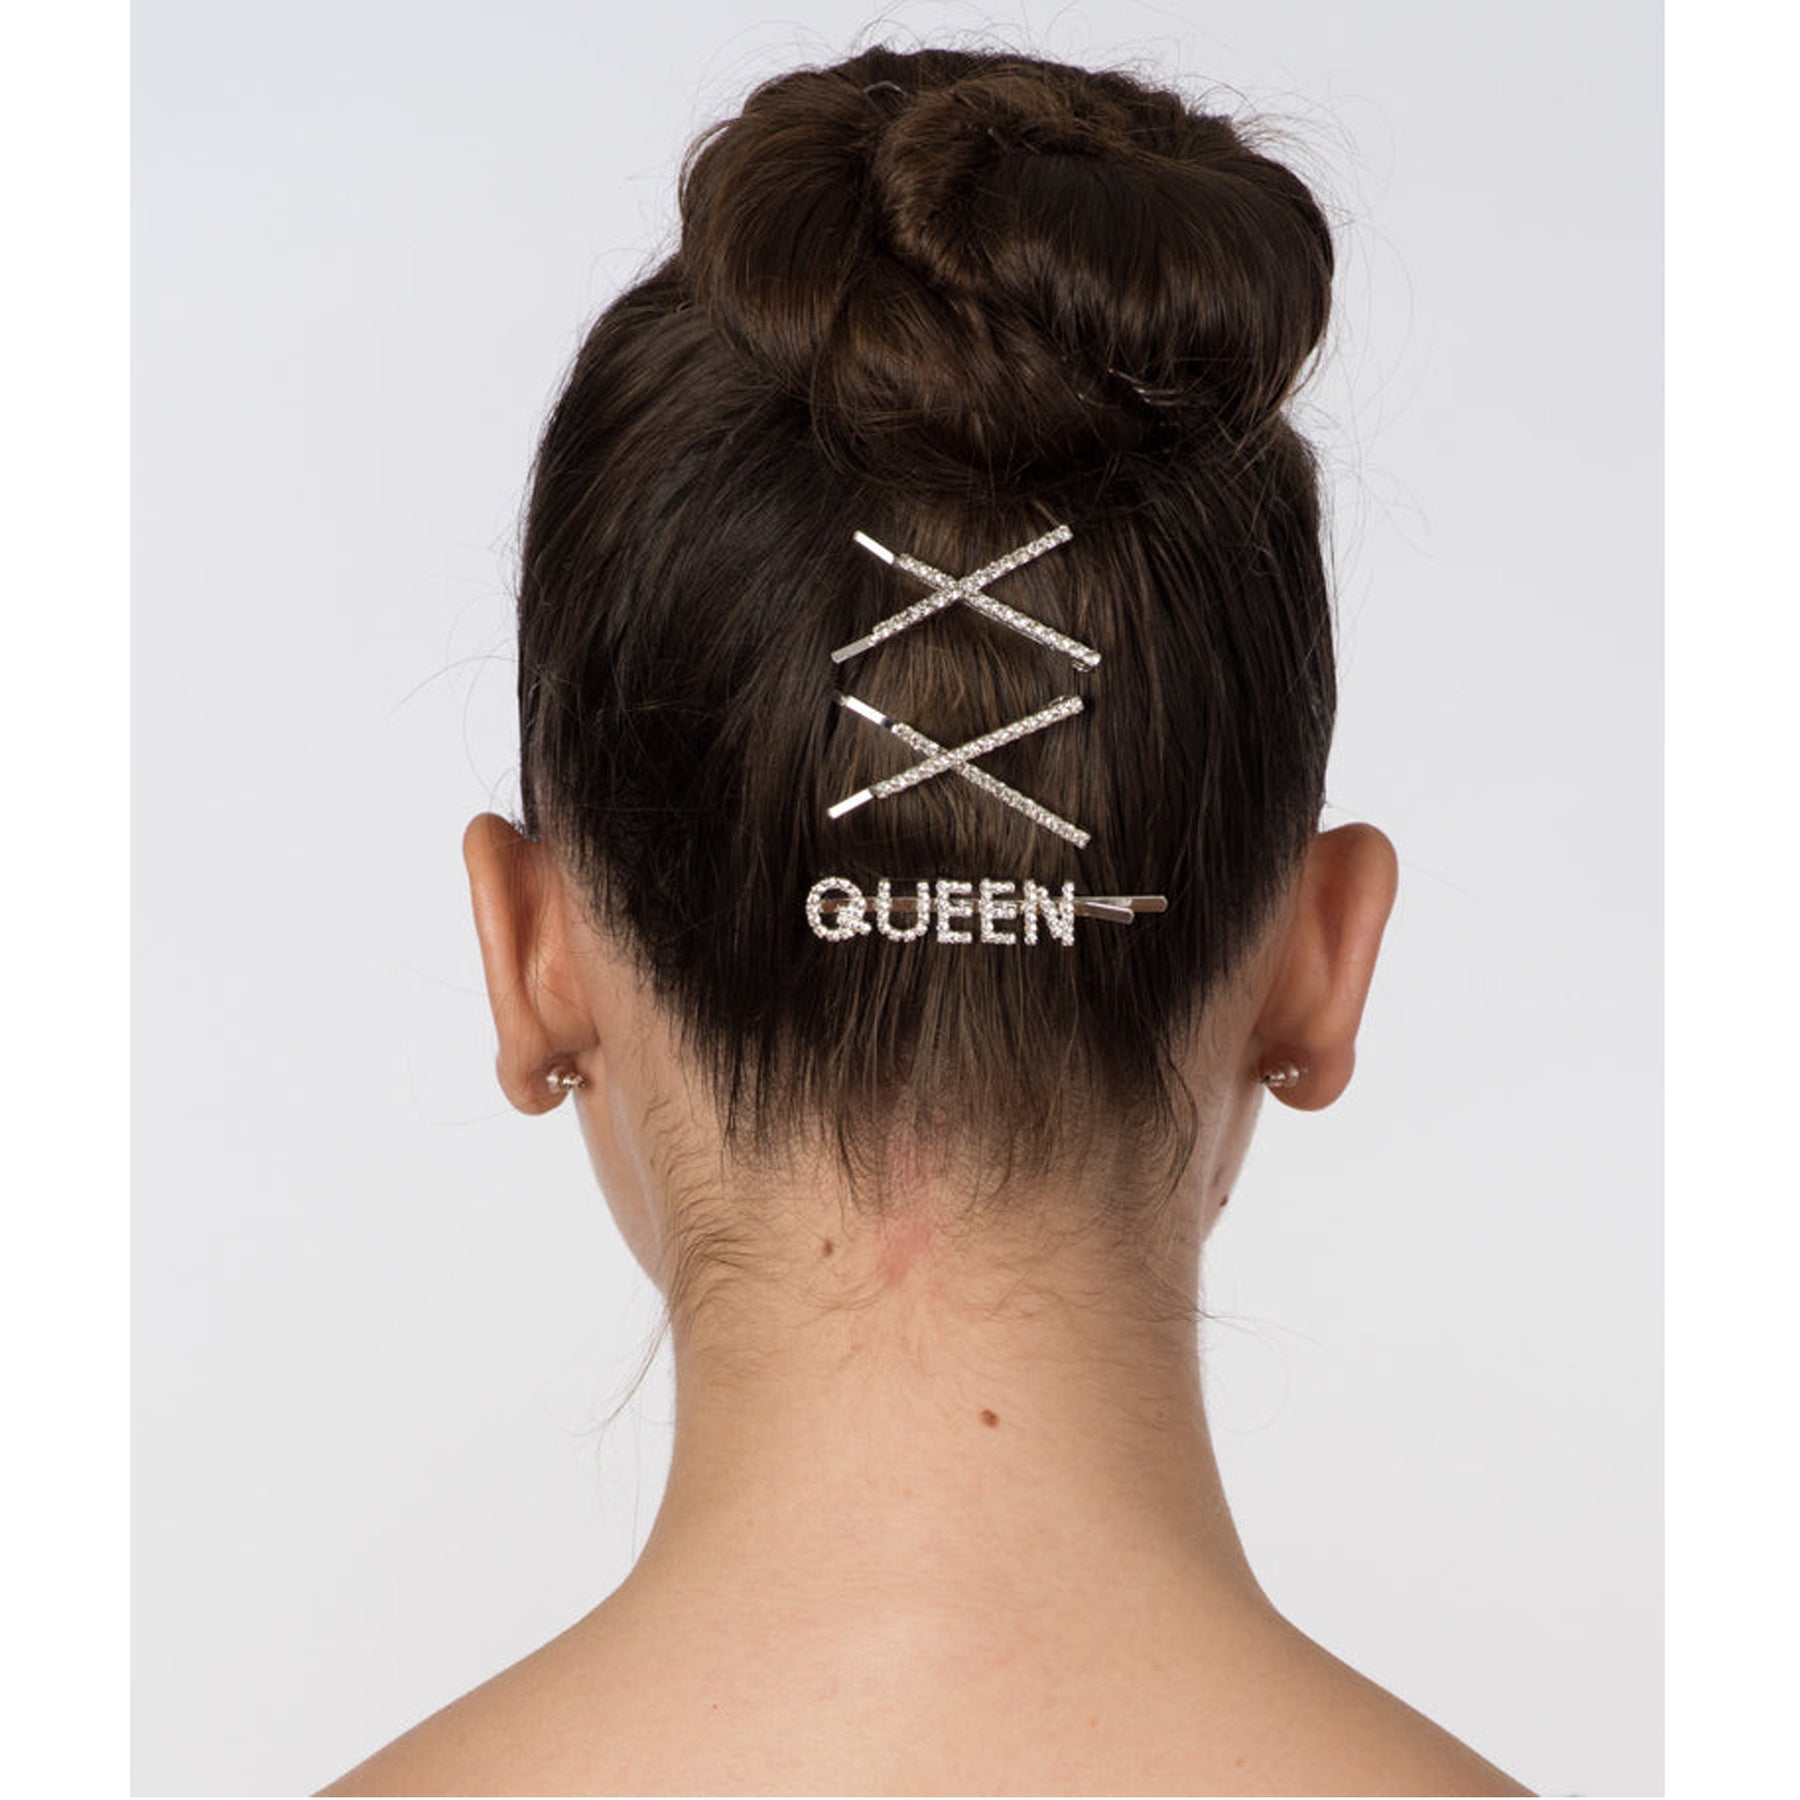 Word Bobby Pin "QUEEN"